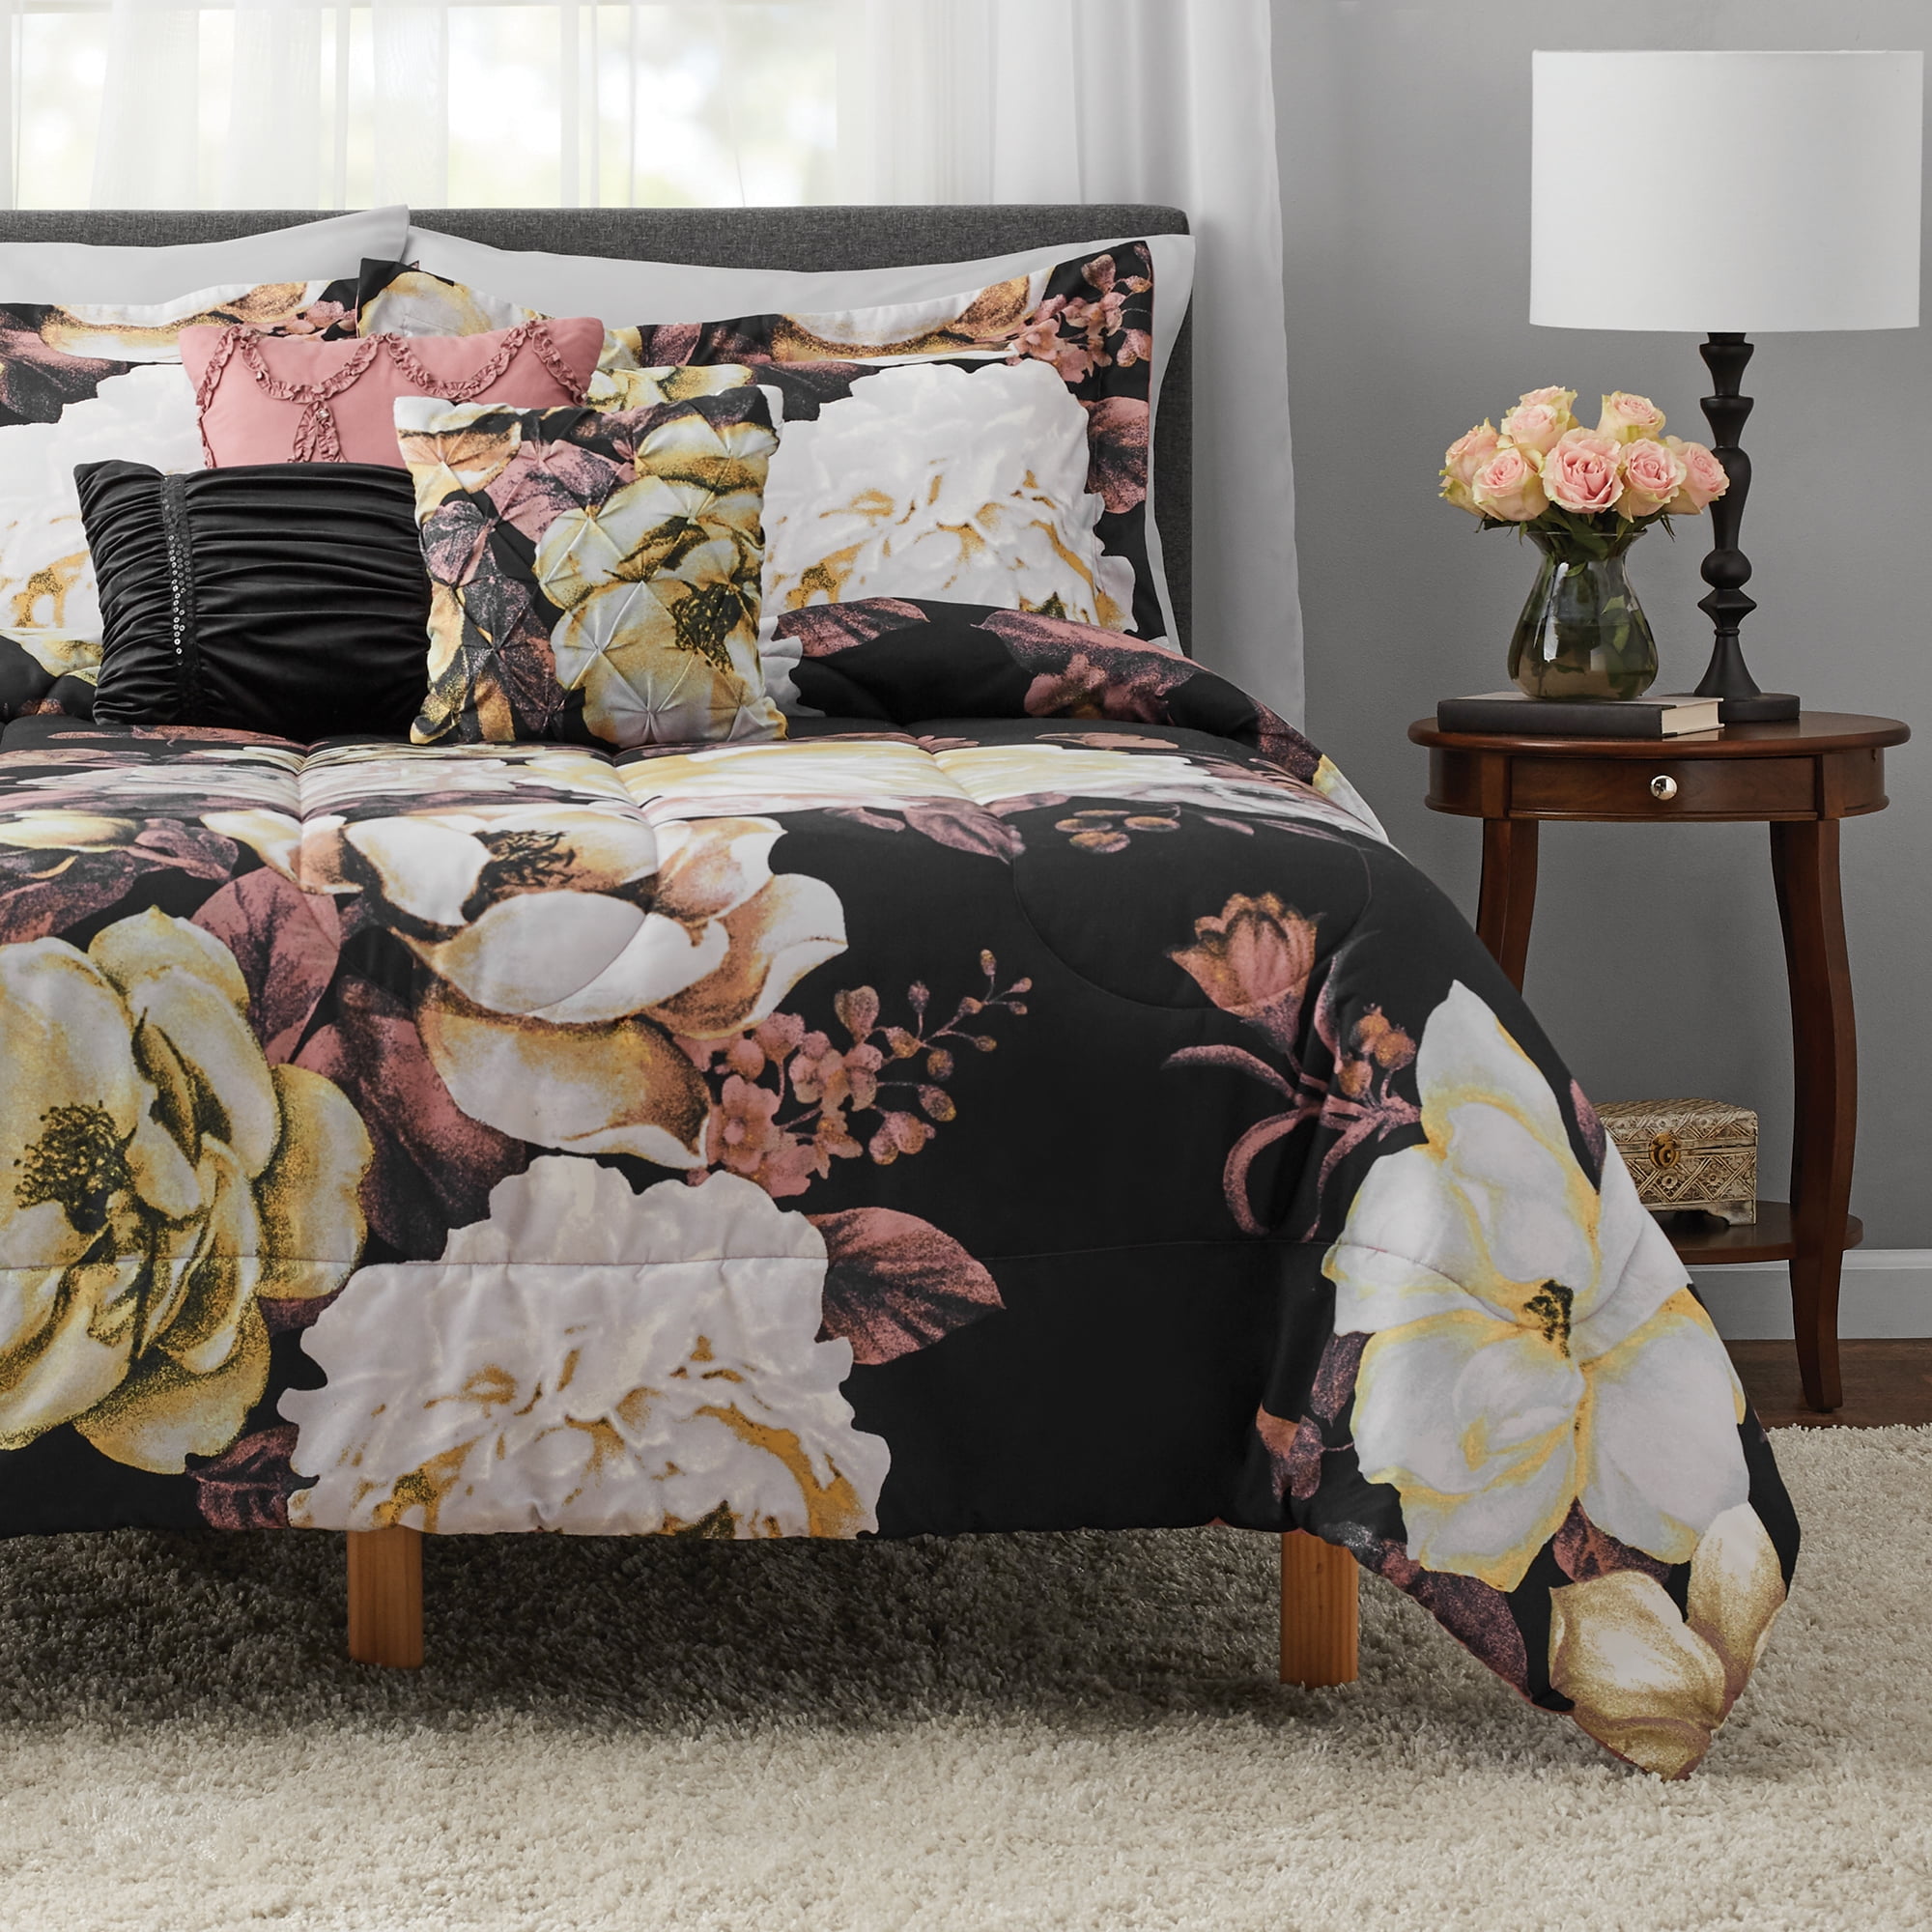 7 Pieces Floral Bedding Comforter Sets,Grey King Size Comforter Set with Sheets Bed-in-A-Bag Wellbeing King Size Comforter